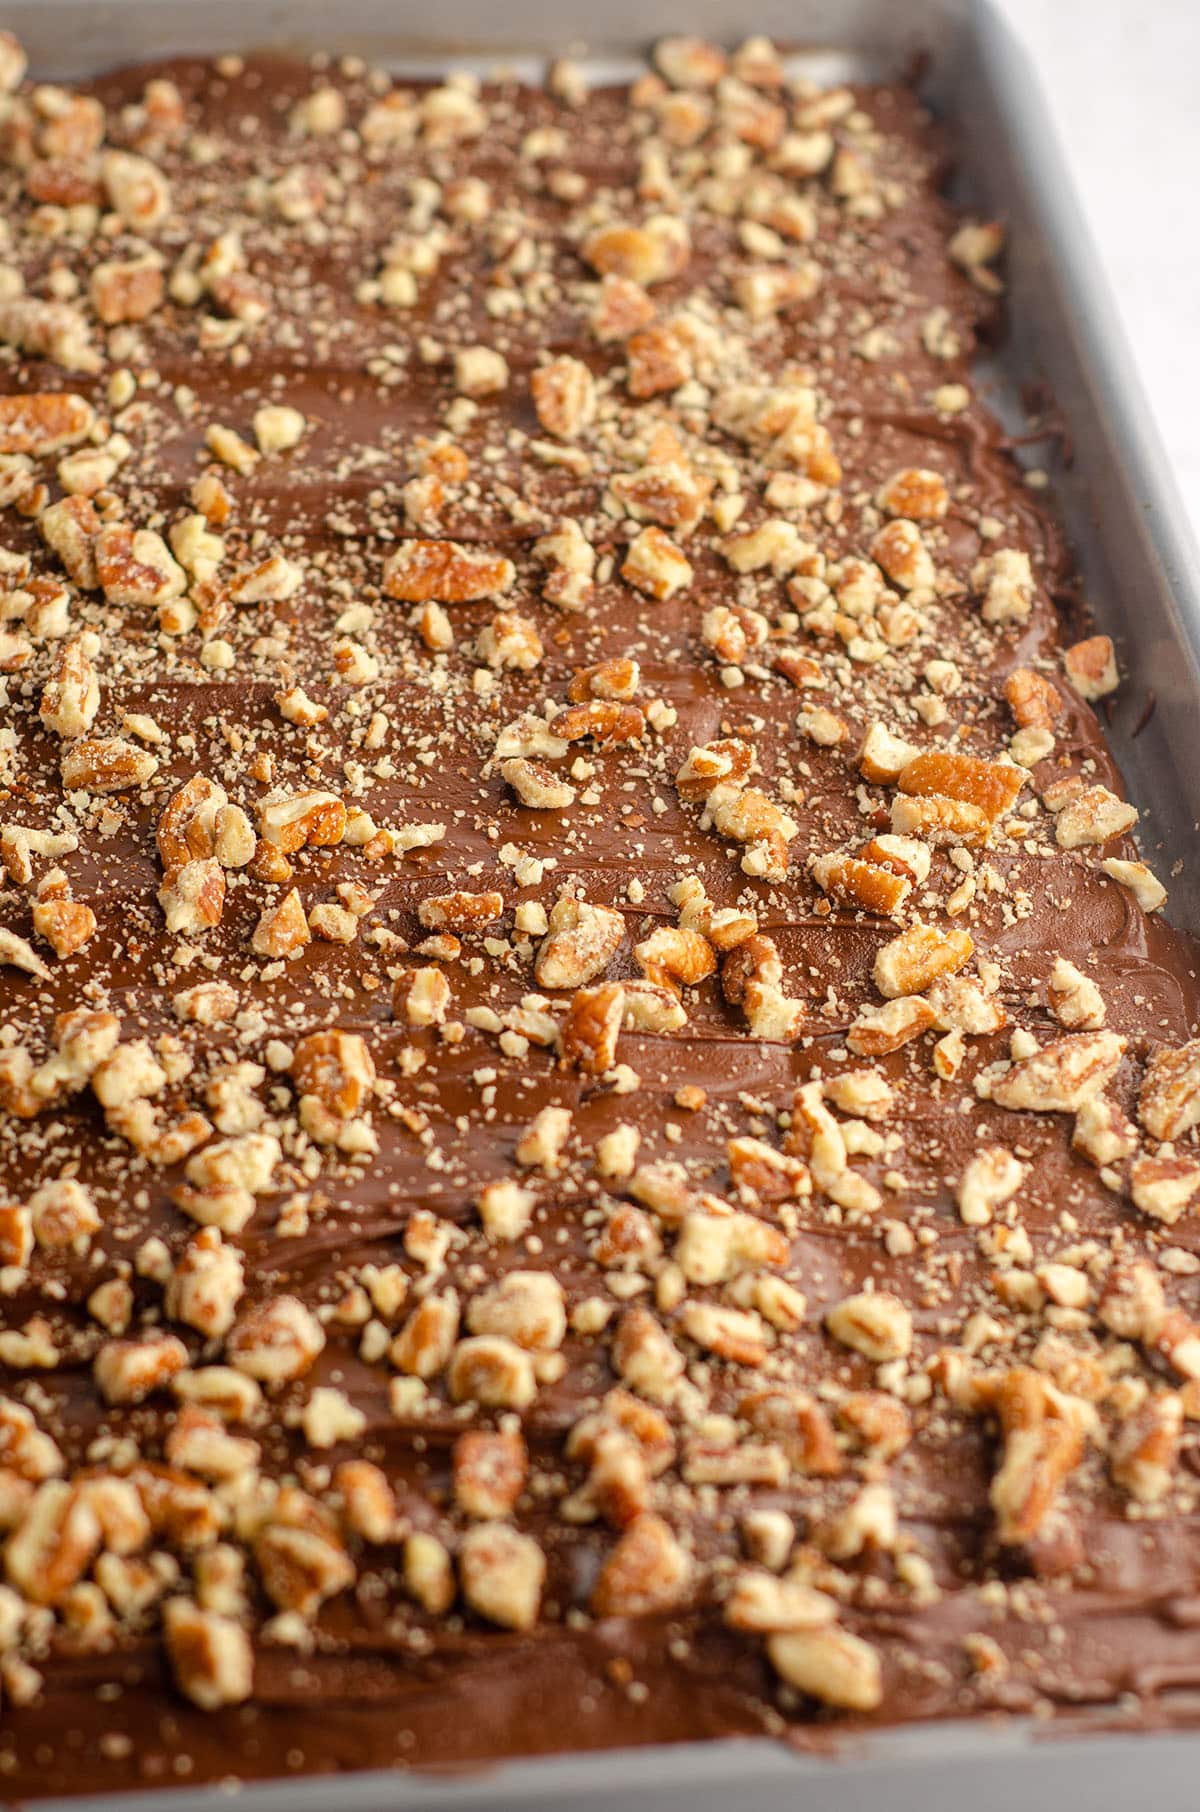 graham cracker toffee bark in baking sheet ready to cut into pieces